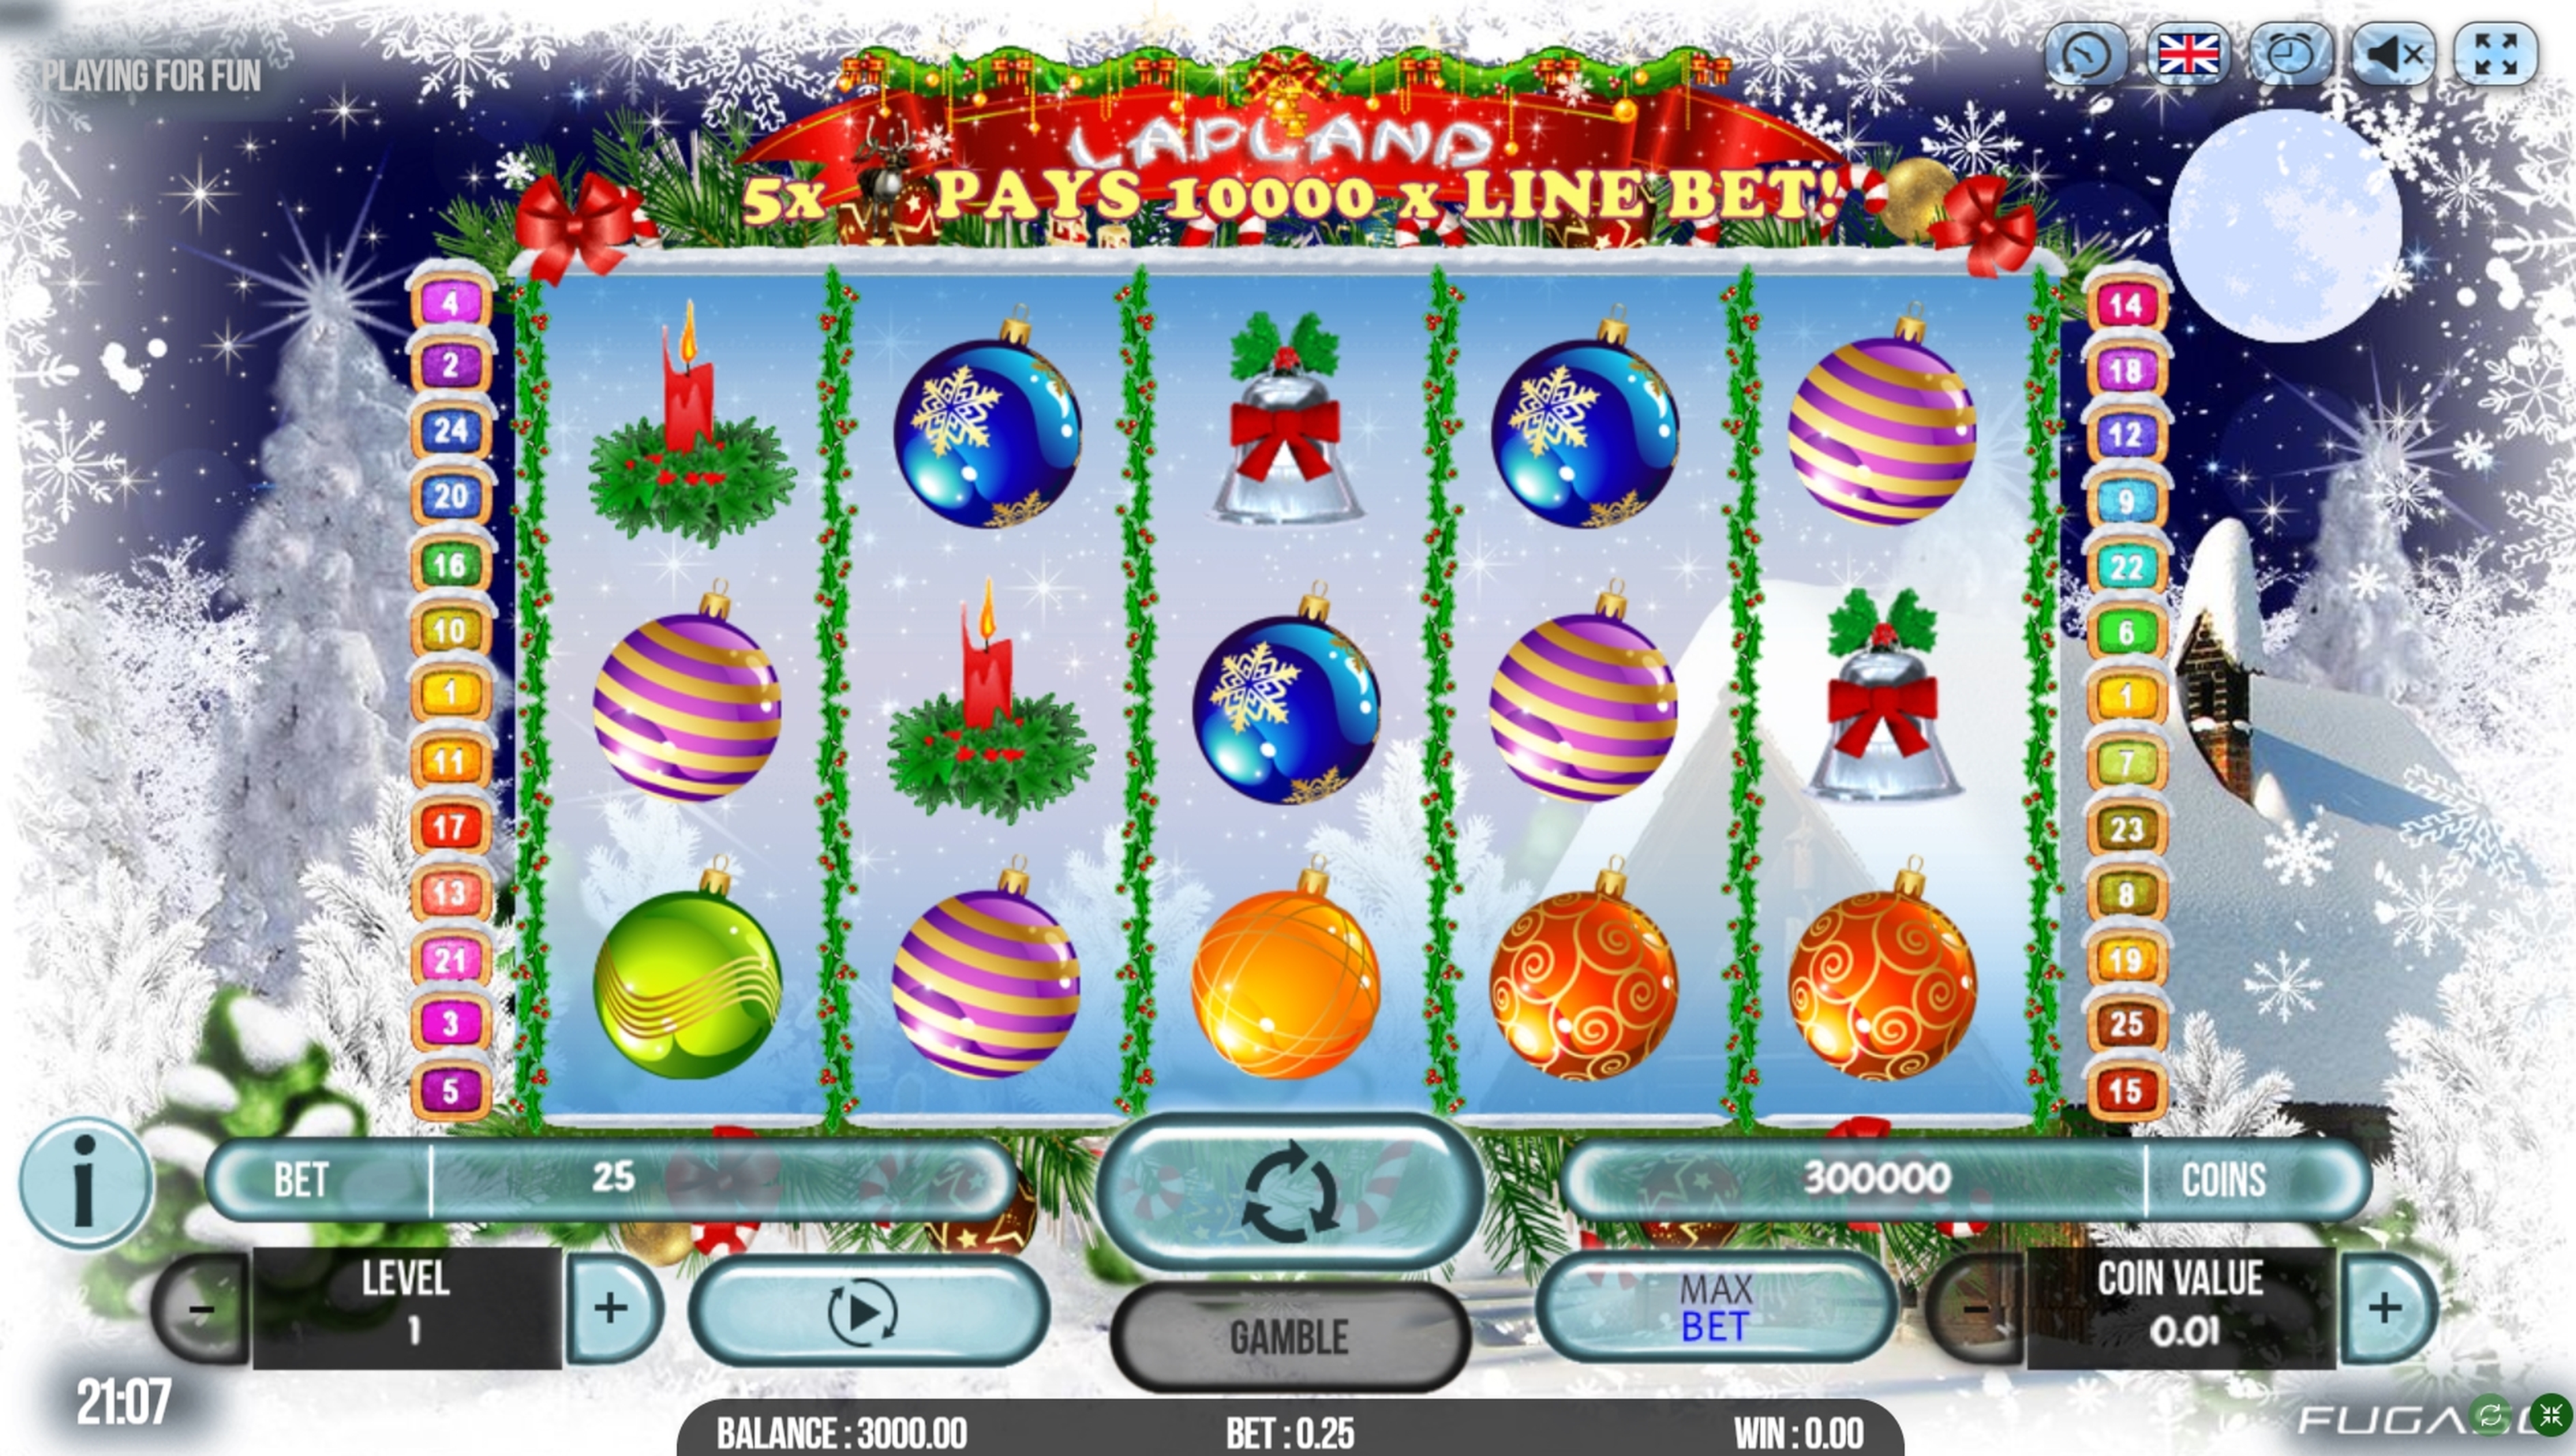 Reels in Lapland Slot Game by Fugaso